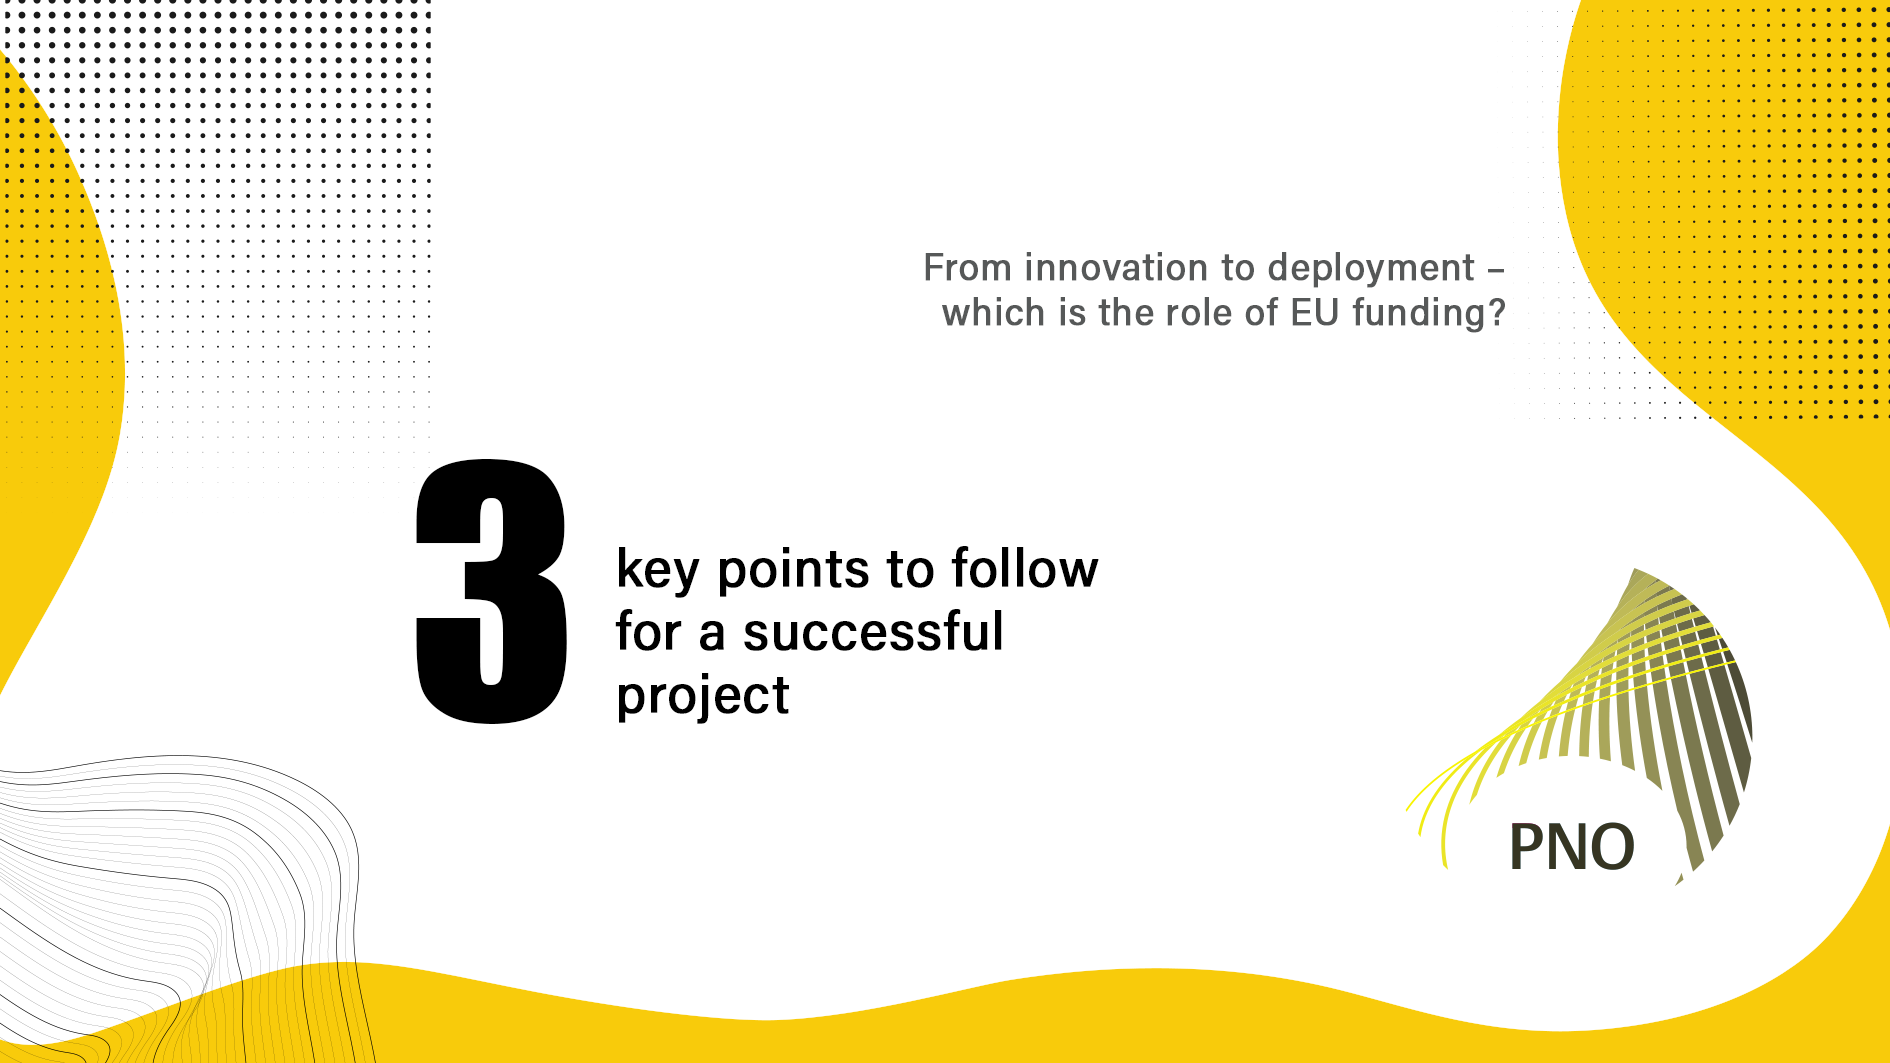 From innovation to deployment – which is the role of EU funding?